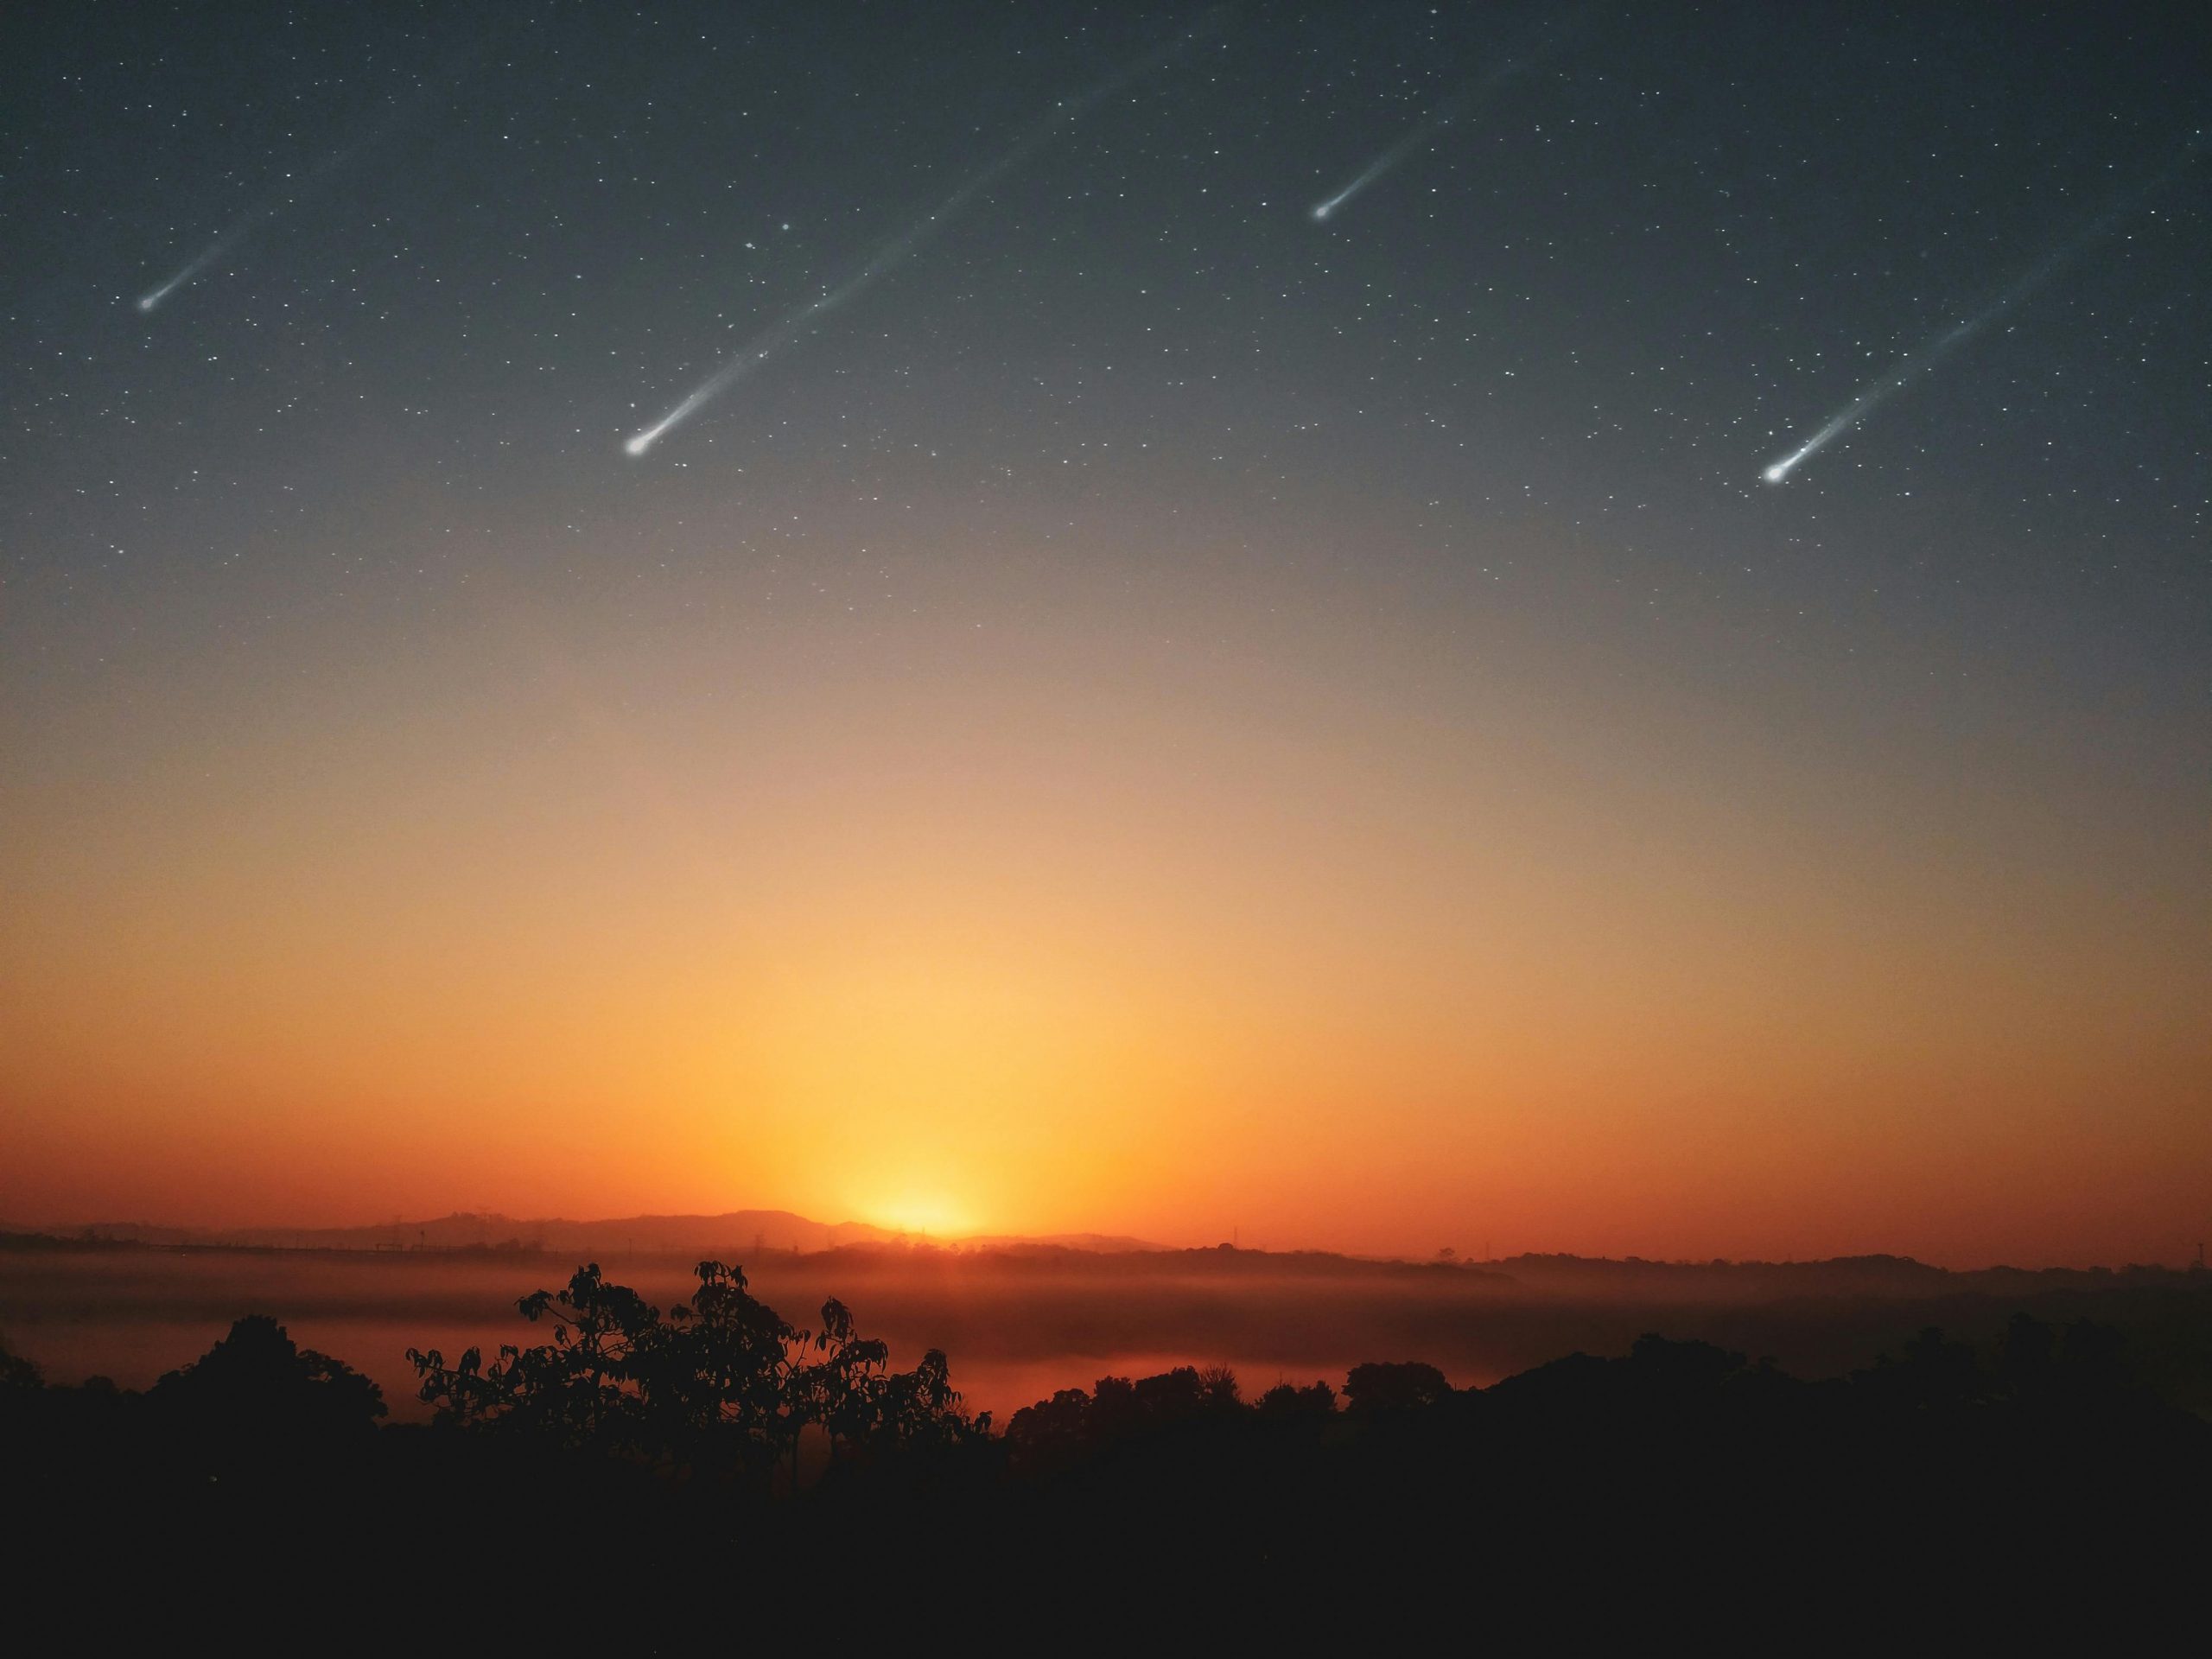 One of the strongest meteor showers is expected to occur, with the number of meteors reaching sixty per hour